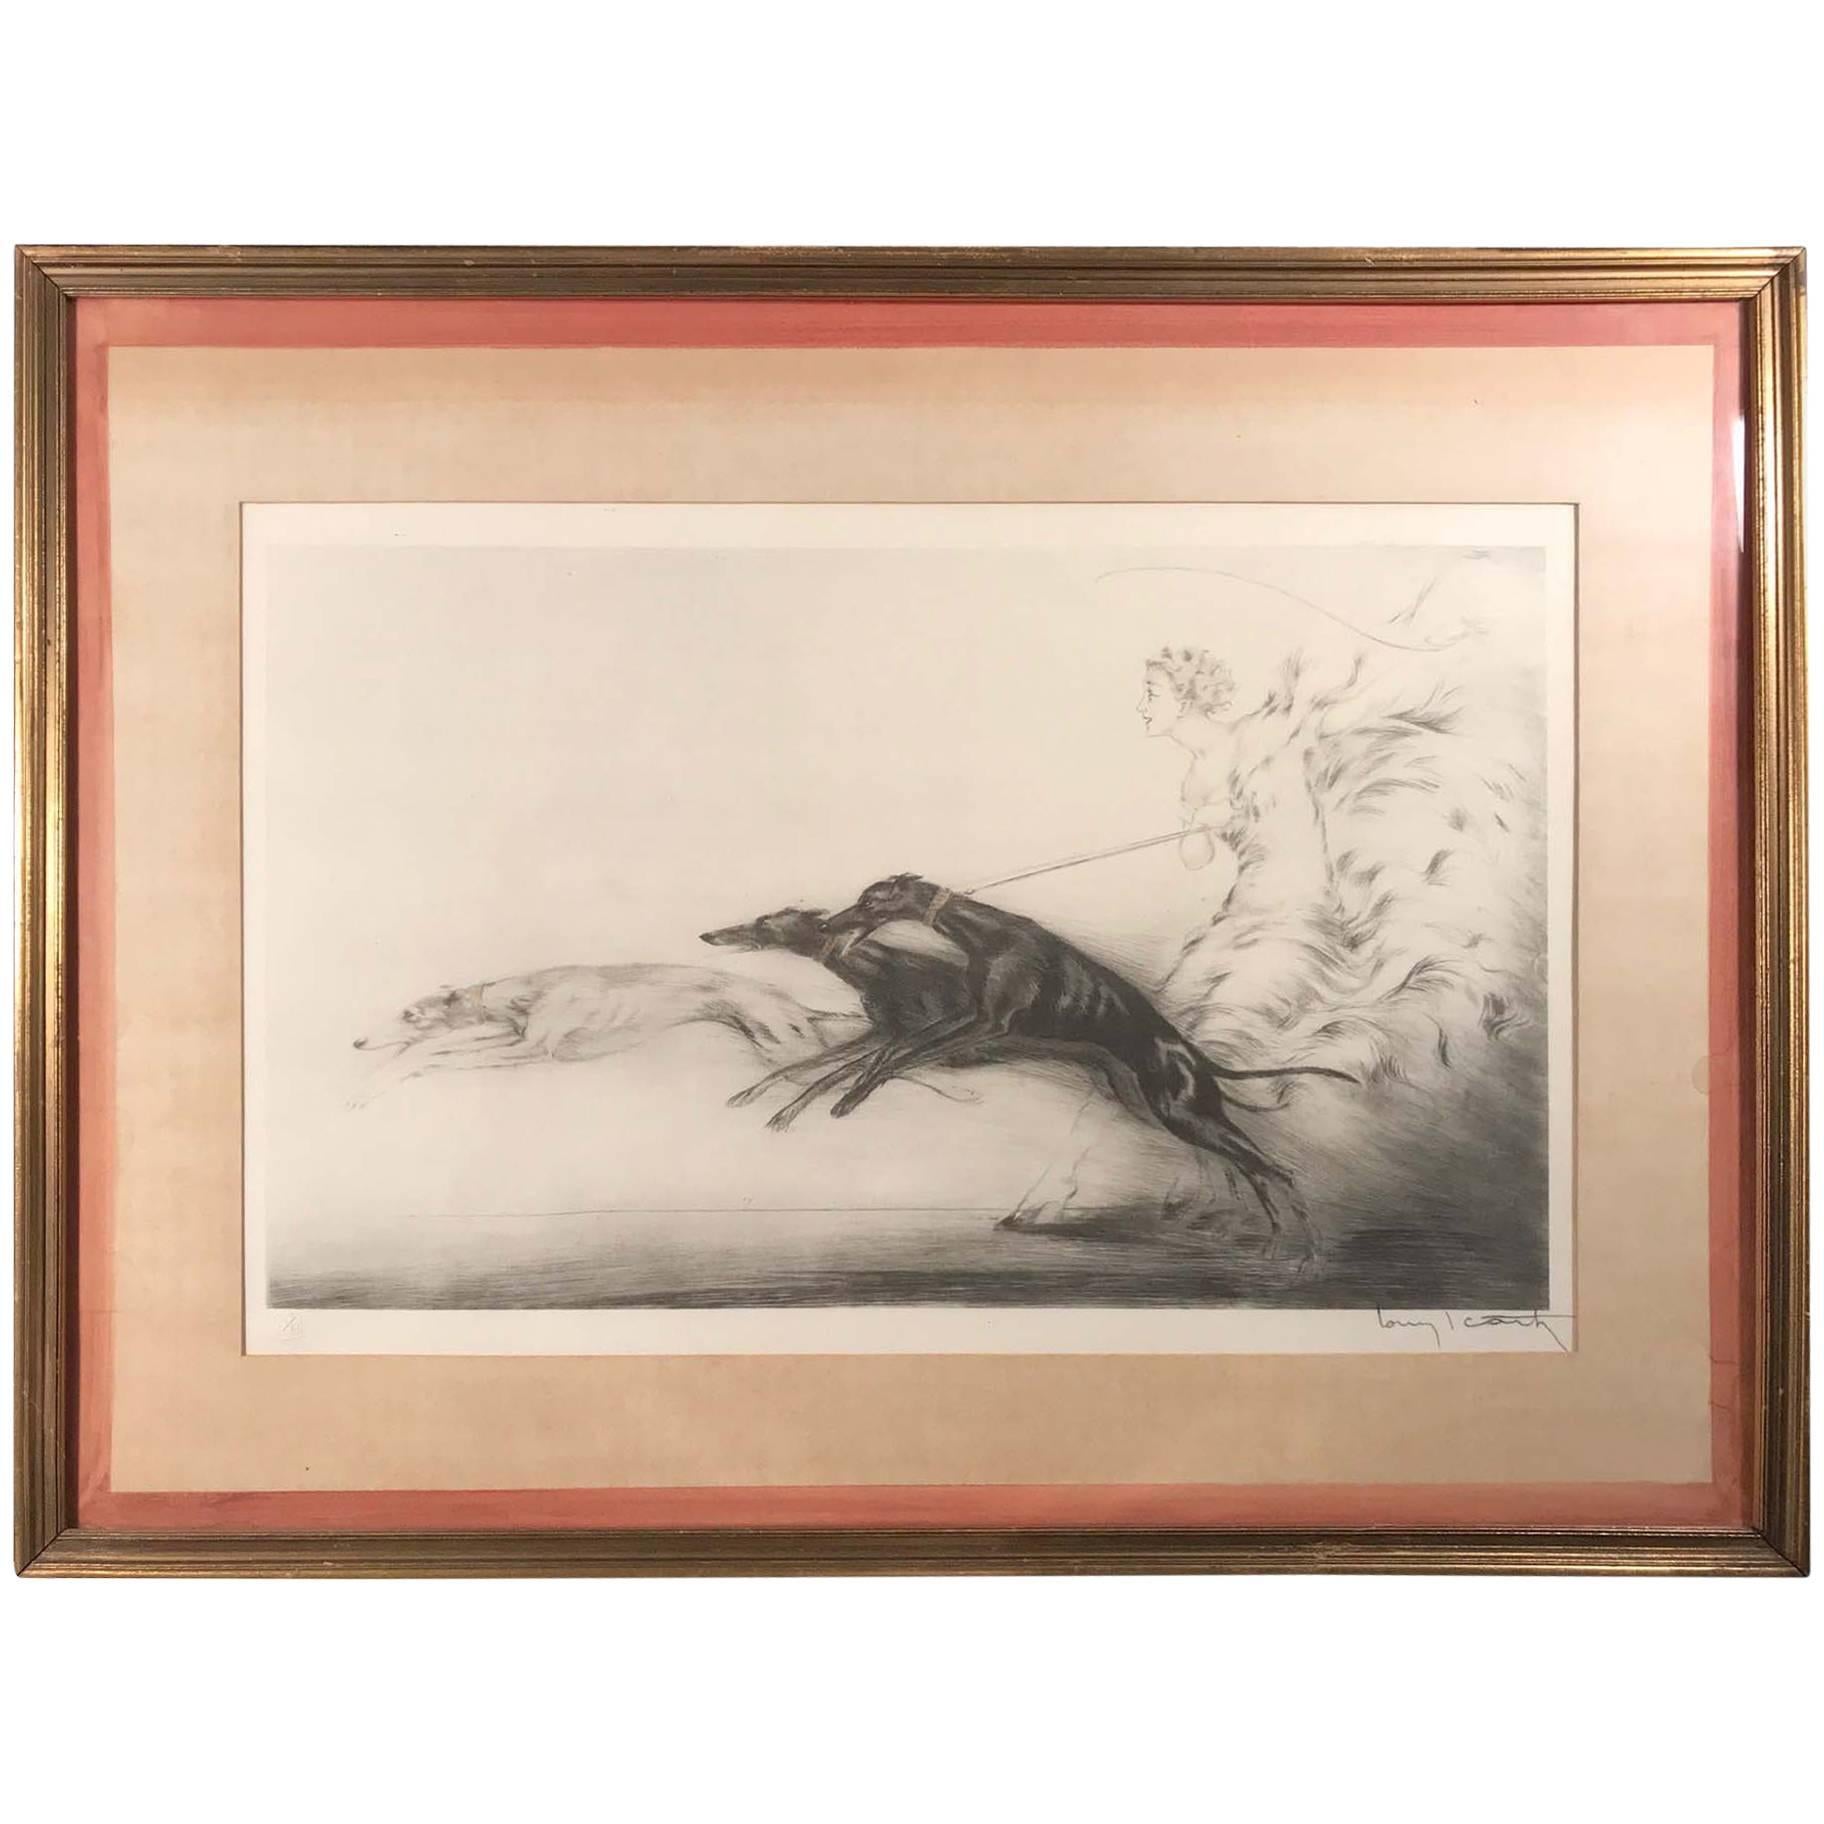 Louis Icart "Speed" Hand Colored Aquatint Signed and with Blind Stamp